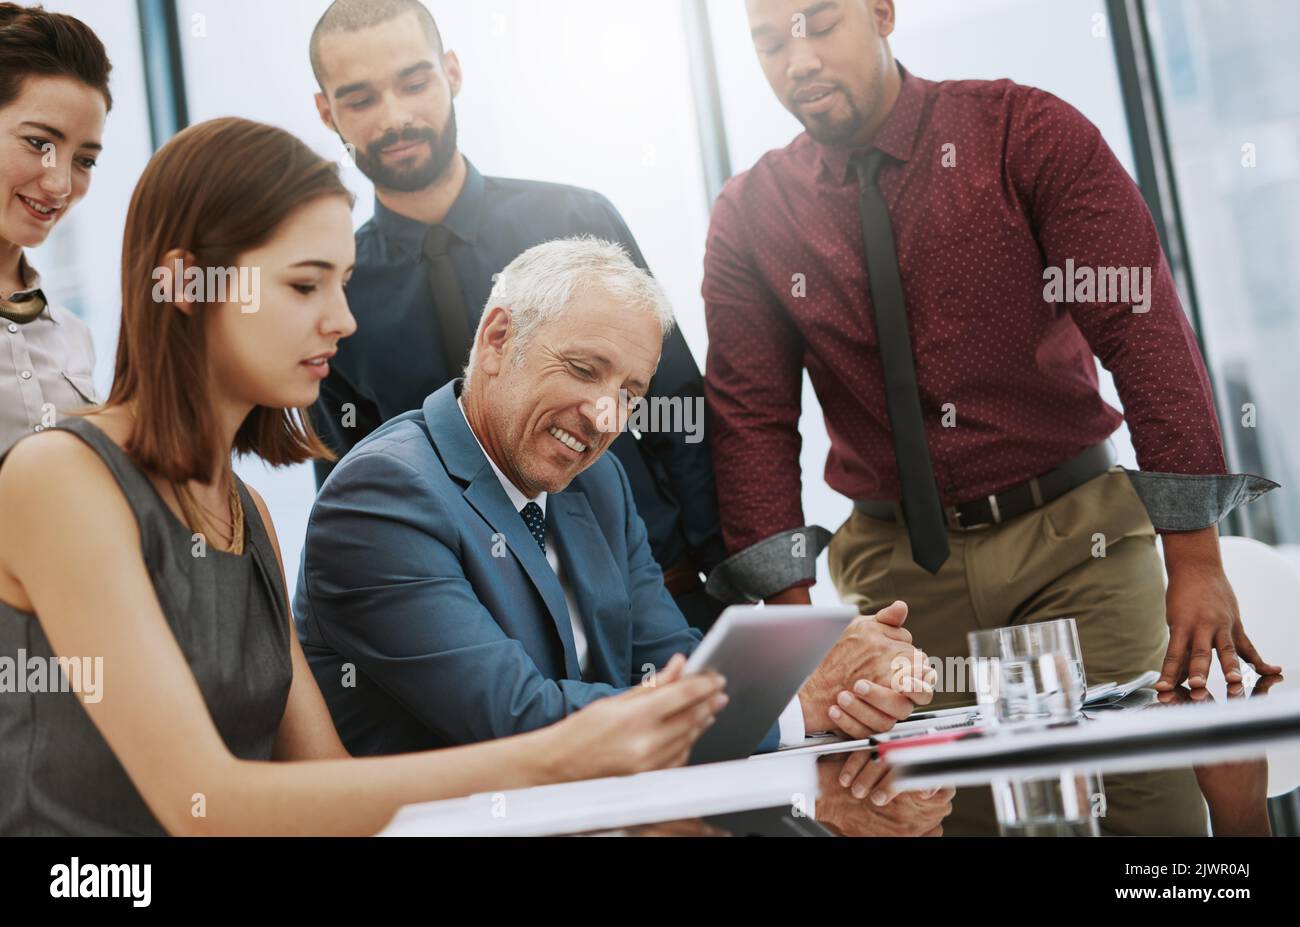 He likes what hes seeing. a group of businesspeople in the boardroom. Stock Photo